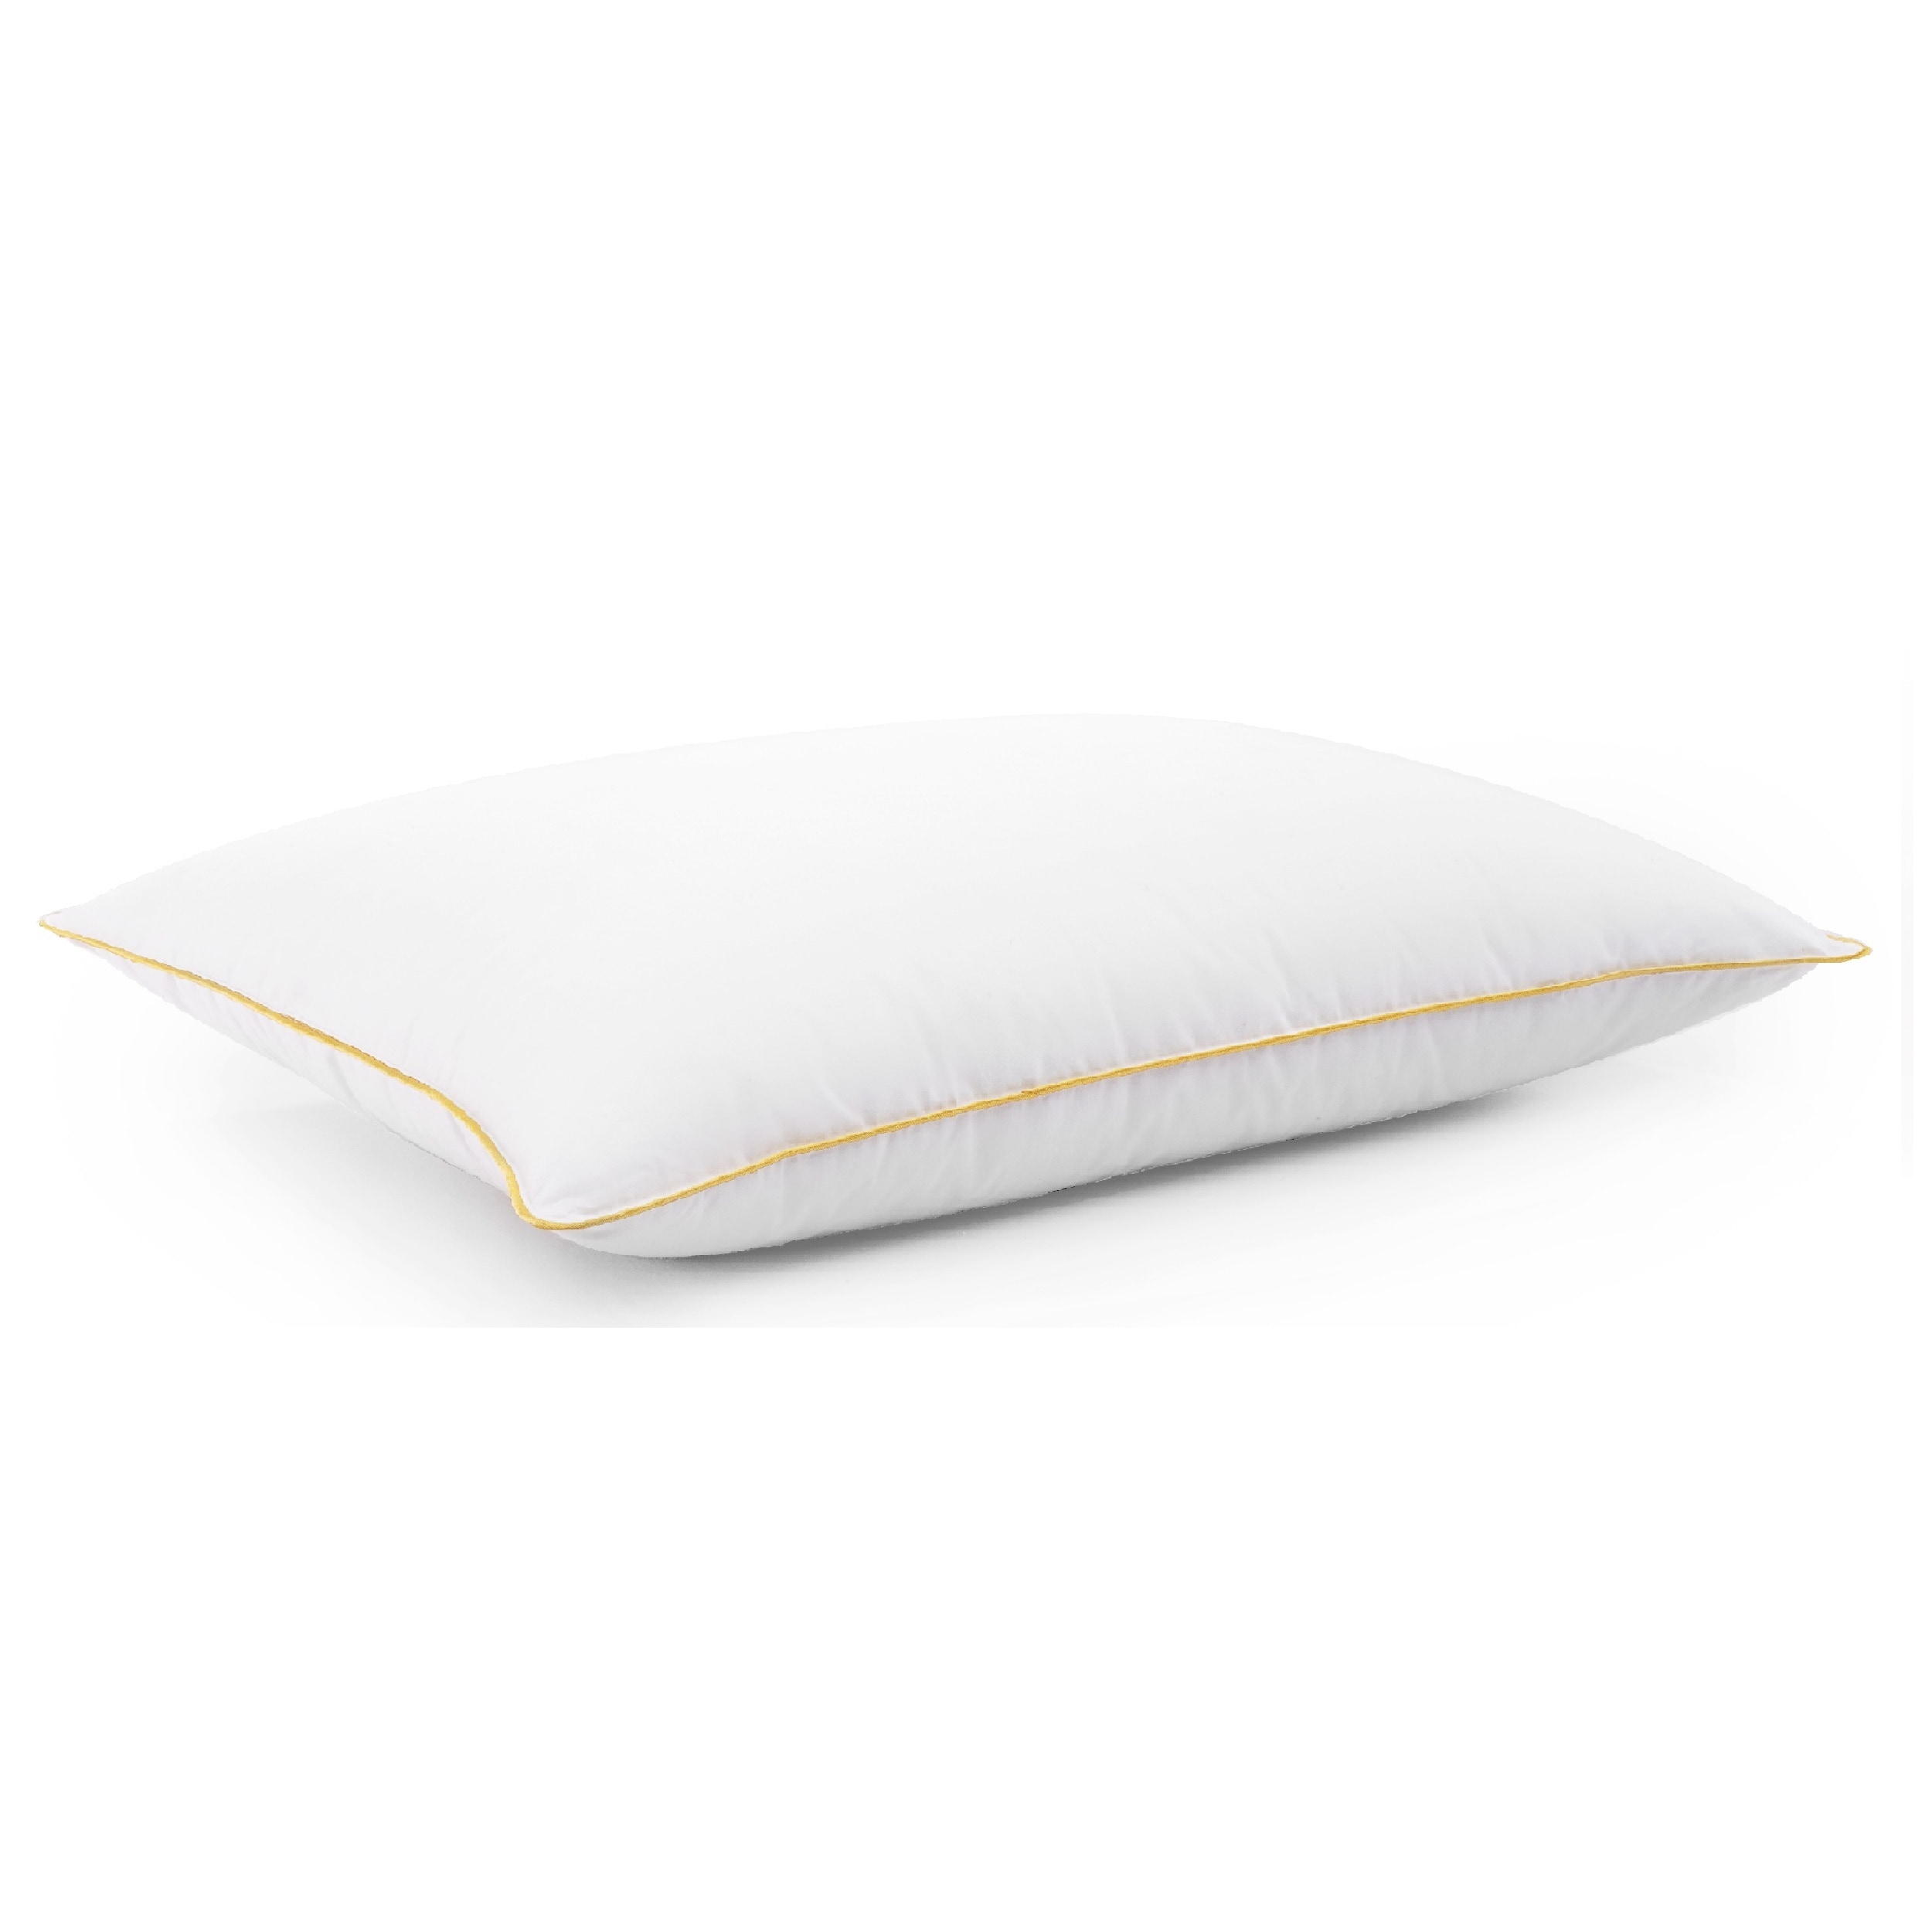 White Cotton Percale 14x19 Sleeping Pillow for Toddlers Cheer Collection Hypoallergenic Toddler Pillow 